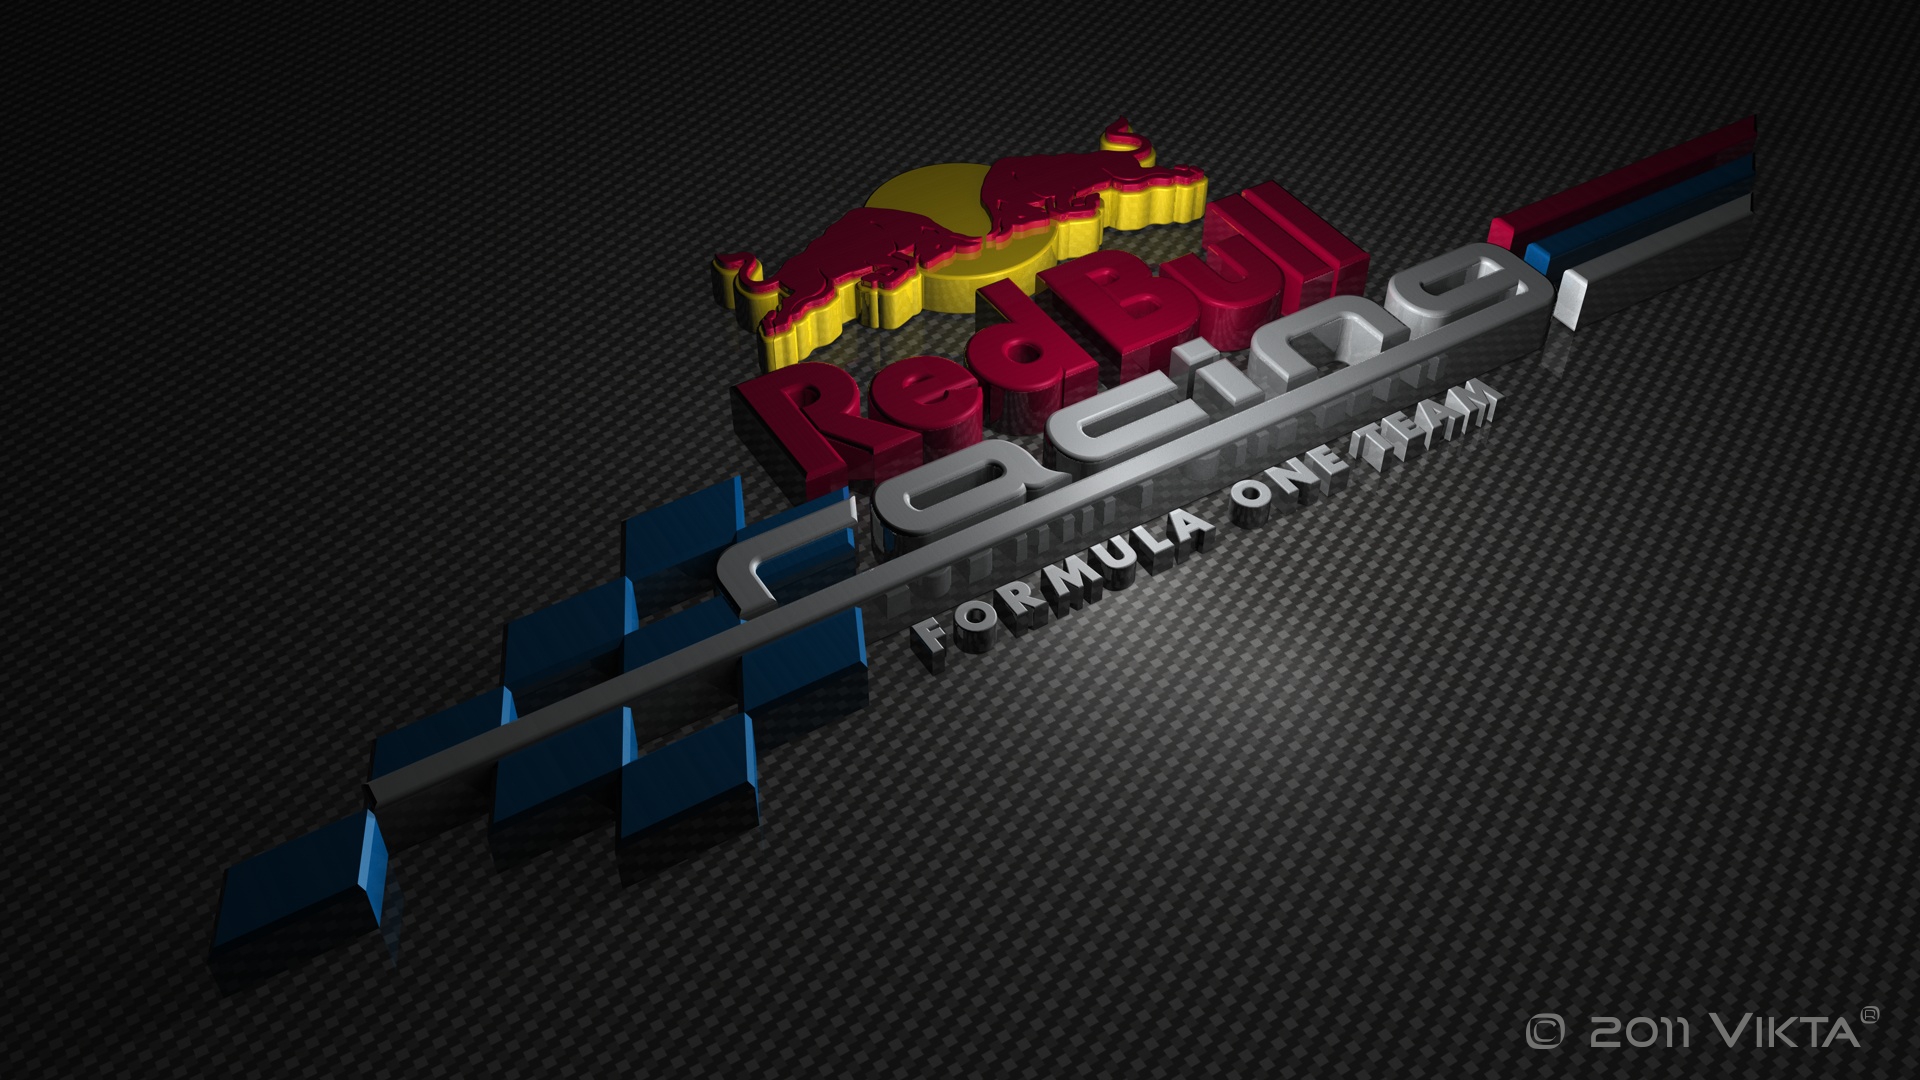 Free Download Red Bull Racing Wallpaper 1920x1080 For Your Desktop Mobile Tablet Explore 72 Red Bull Racing Wallpaper Red Bull Wallpaper Red Bull Ktm Wallpaper Red X Wallpaper